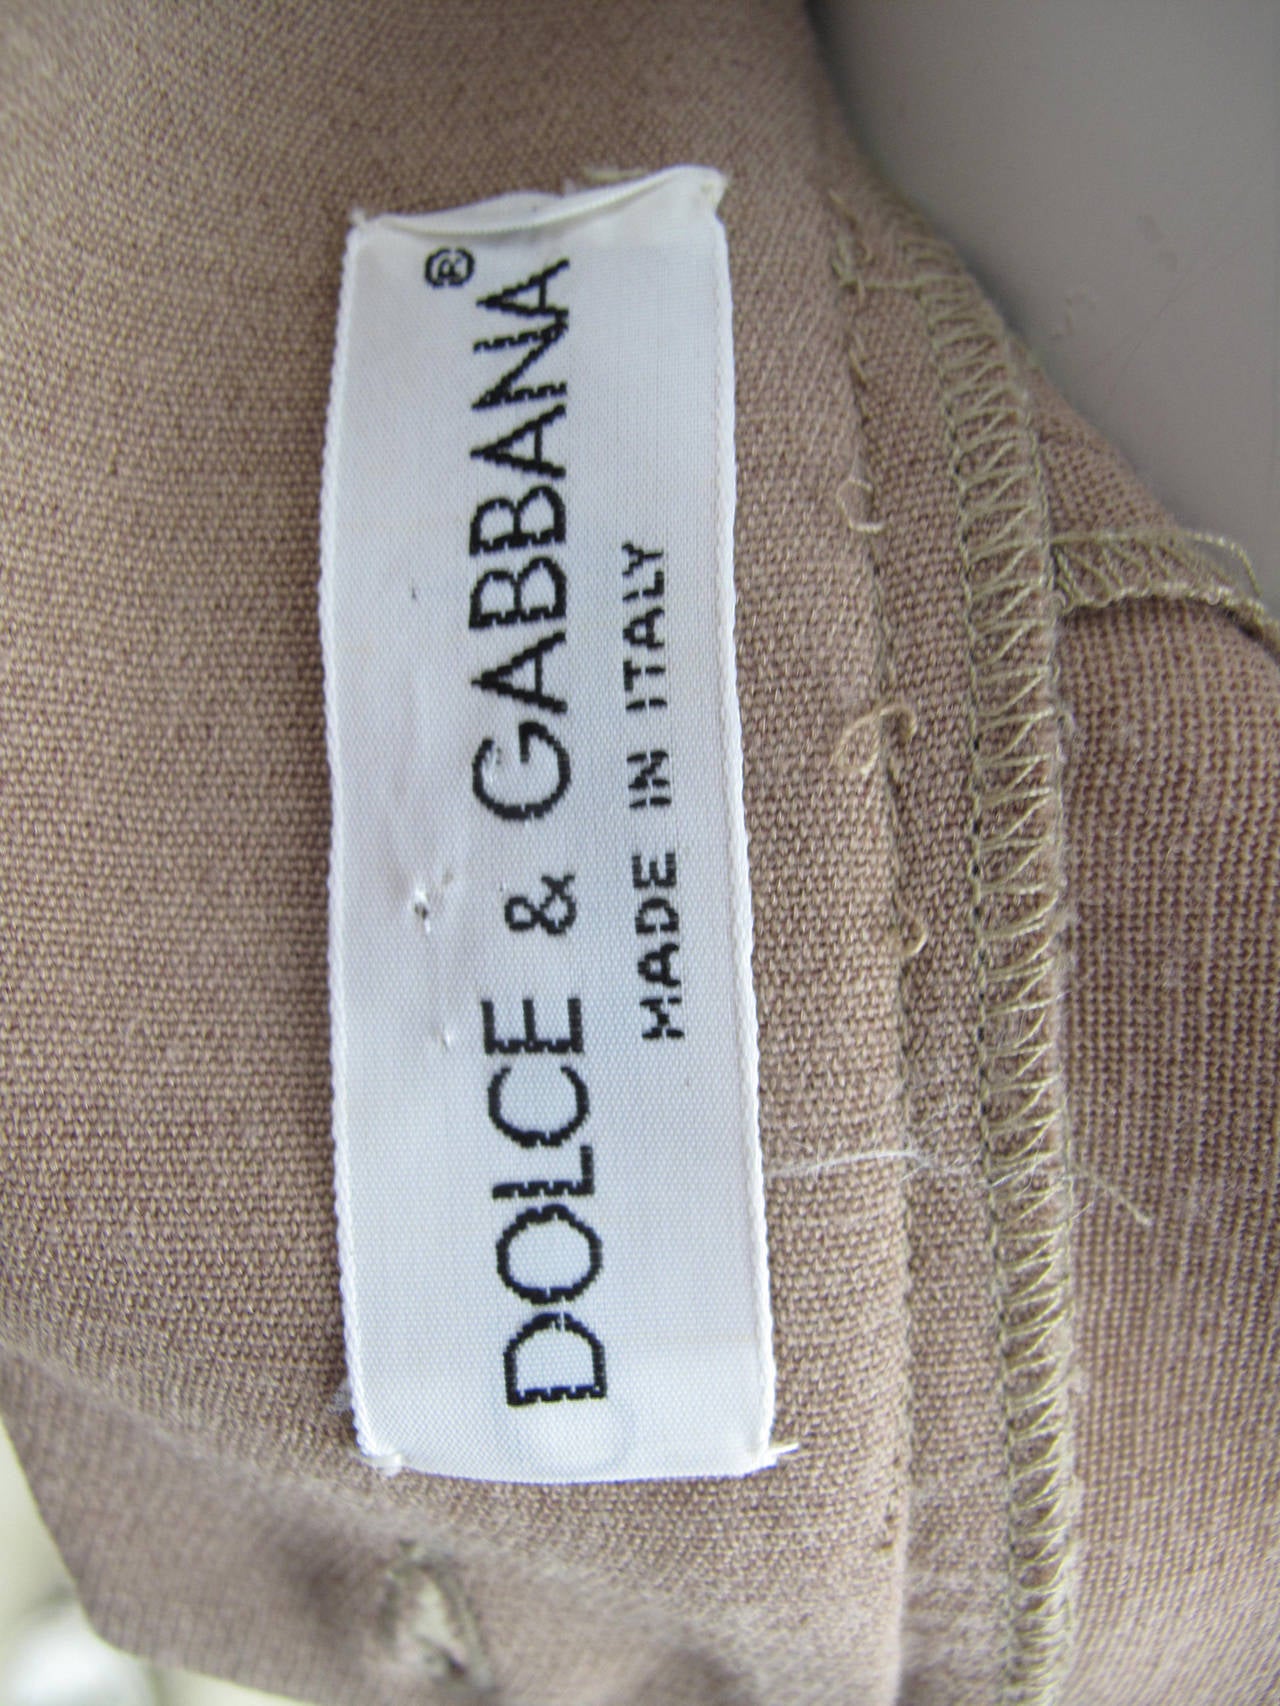 Women's Dolce and Gabbana pale taupe pencil skirt